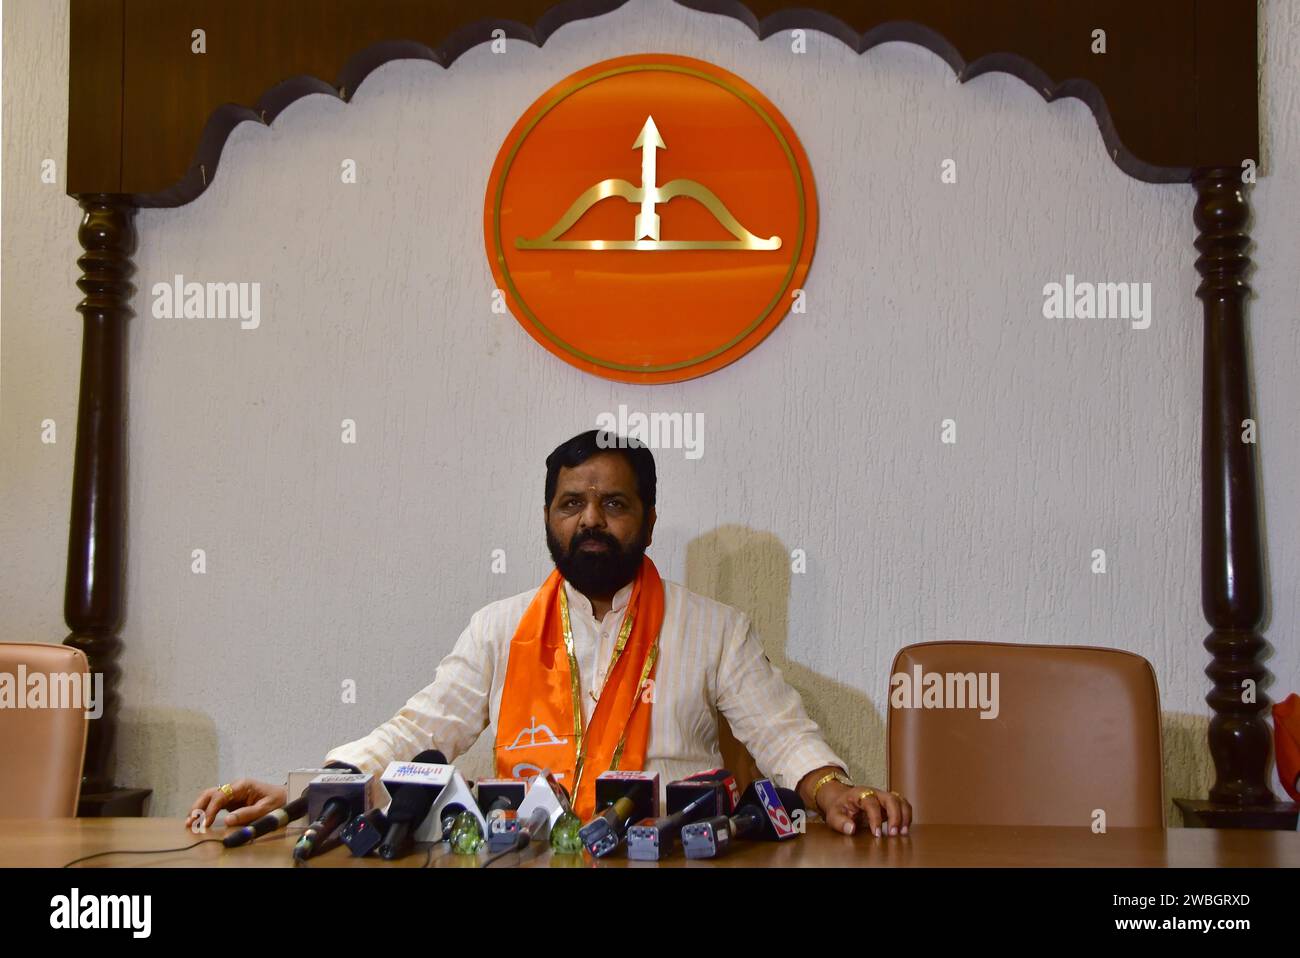 MUMBAI, INDIA - JANUARY 10: Shiv Sena (Shinde faction) MLA Bharat Gogawale speaks to the media after the Shiv Sena MLA disqualification case verdict, at Balasaheb Bhavan on January 10, 2024 in Mumbai, India. The Maharashtra Legislative Assembly Speaker Rahul Narwekar today held that Eknath Shinde led faction was the real Shiv Sena when the rival faction emerged within the party on June 22, 2022. He has refused to disqualify any member from both the factions, led by Shinde and Uddhav Thackeray. Both the factions had filed 34 petitions against each other before the speaker in 2022, seeking the Stock Photo